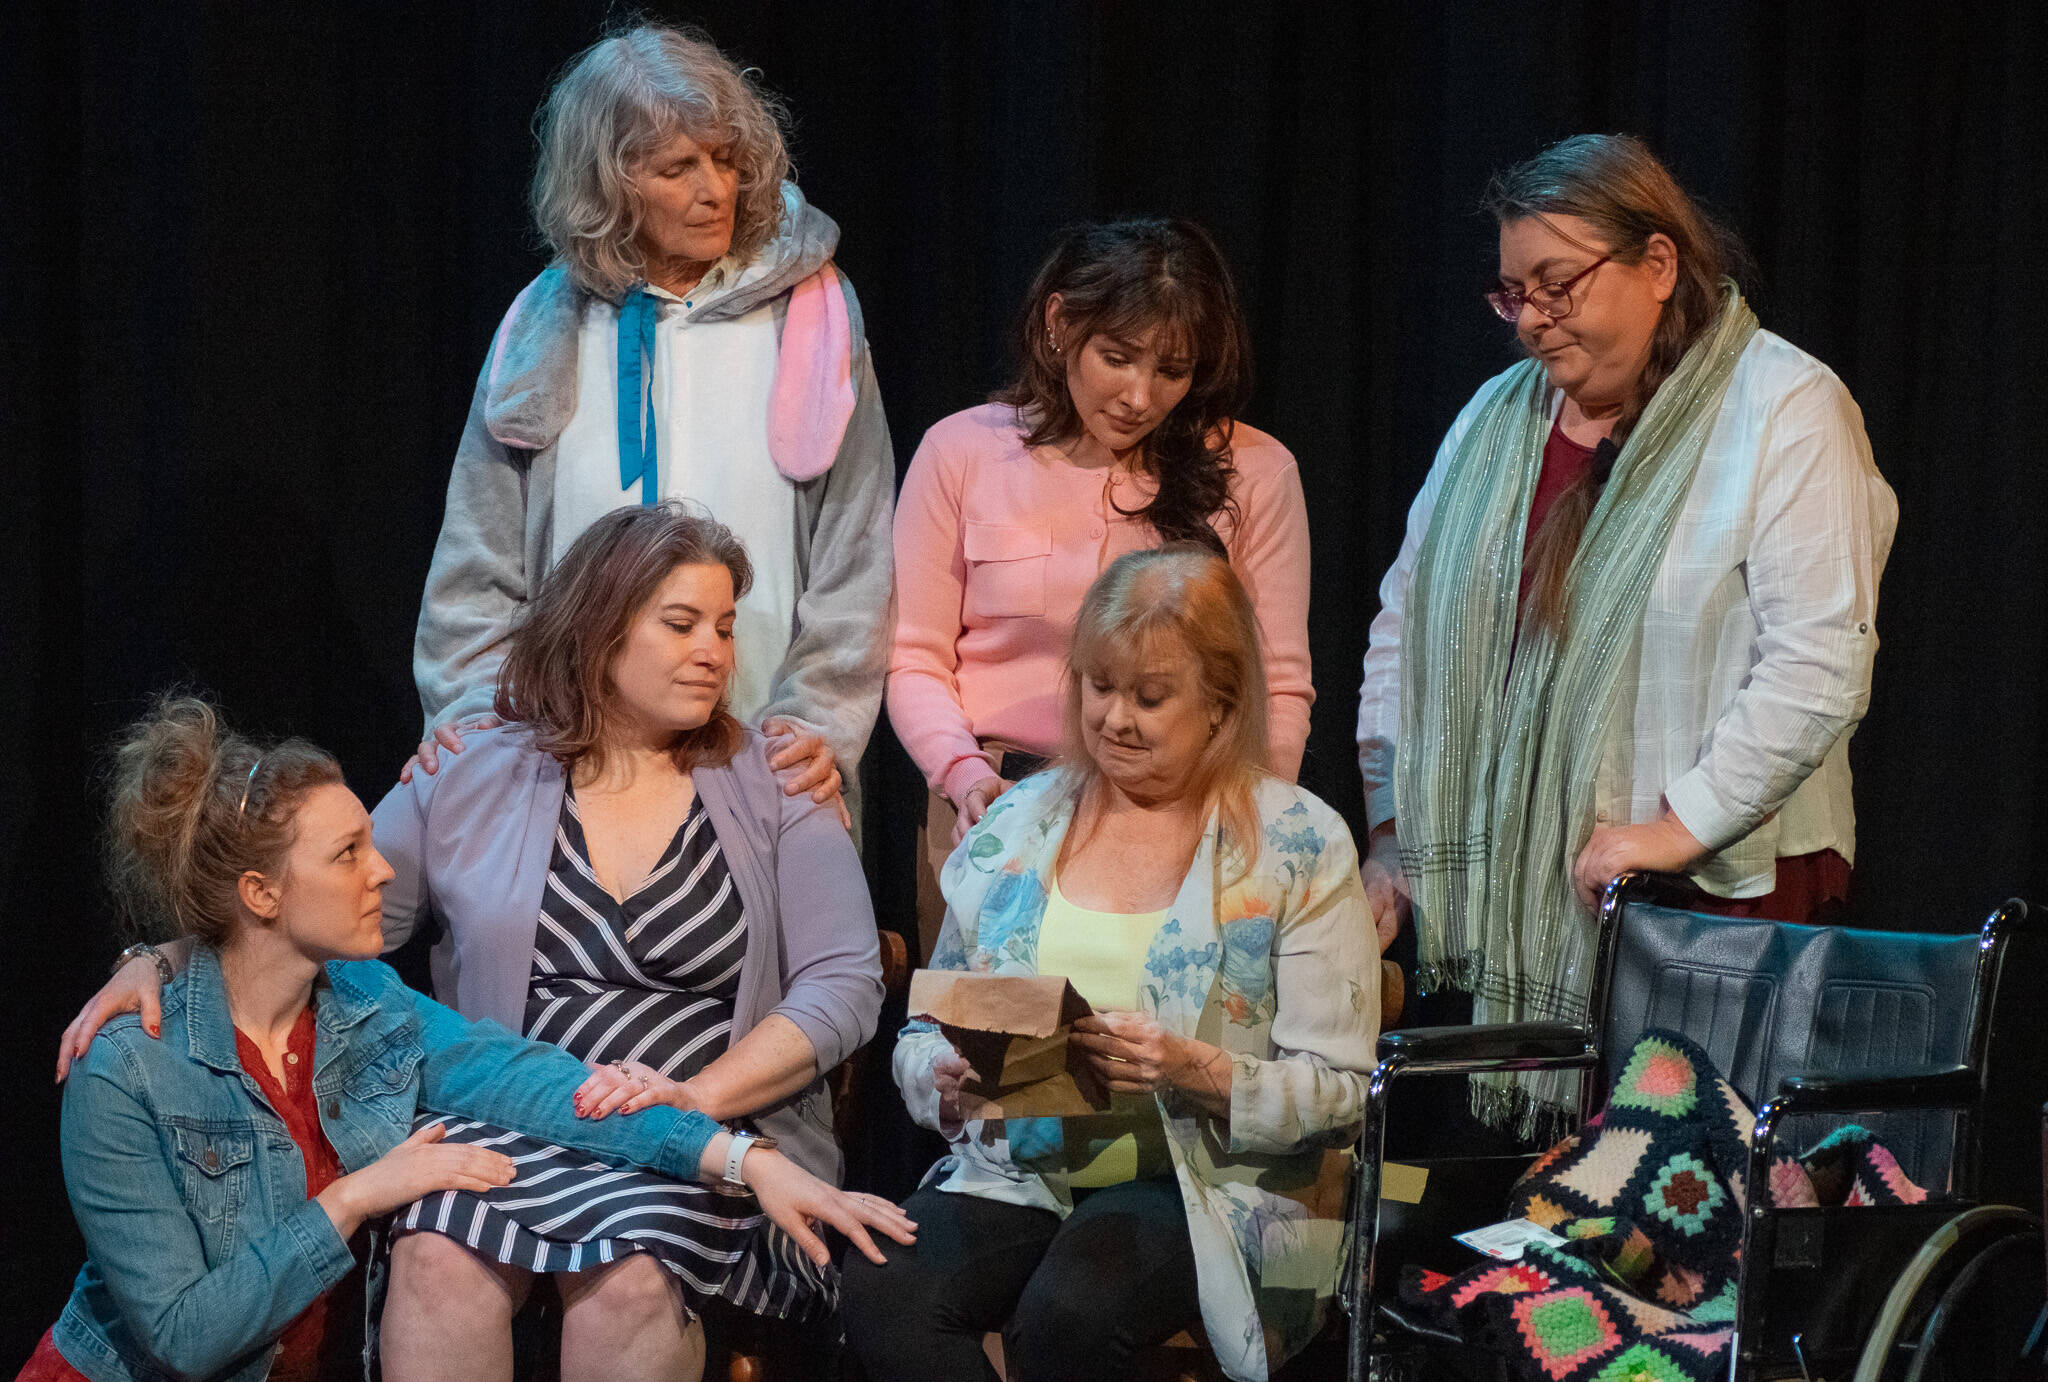 Front, from left to right, Merrin Packer, Taryn Dupont, Cheryl DiPietro and, behind, Cheryl Tamblyn, Jamie Pauley and Amy Henry participate in a poignant scene in “Calendar Girls,” Olympic Theatre Arts’ newest production. (Emily Matthiessen/Olympic Peninsula News Group)